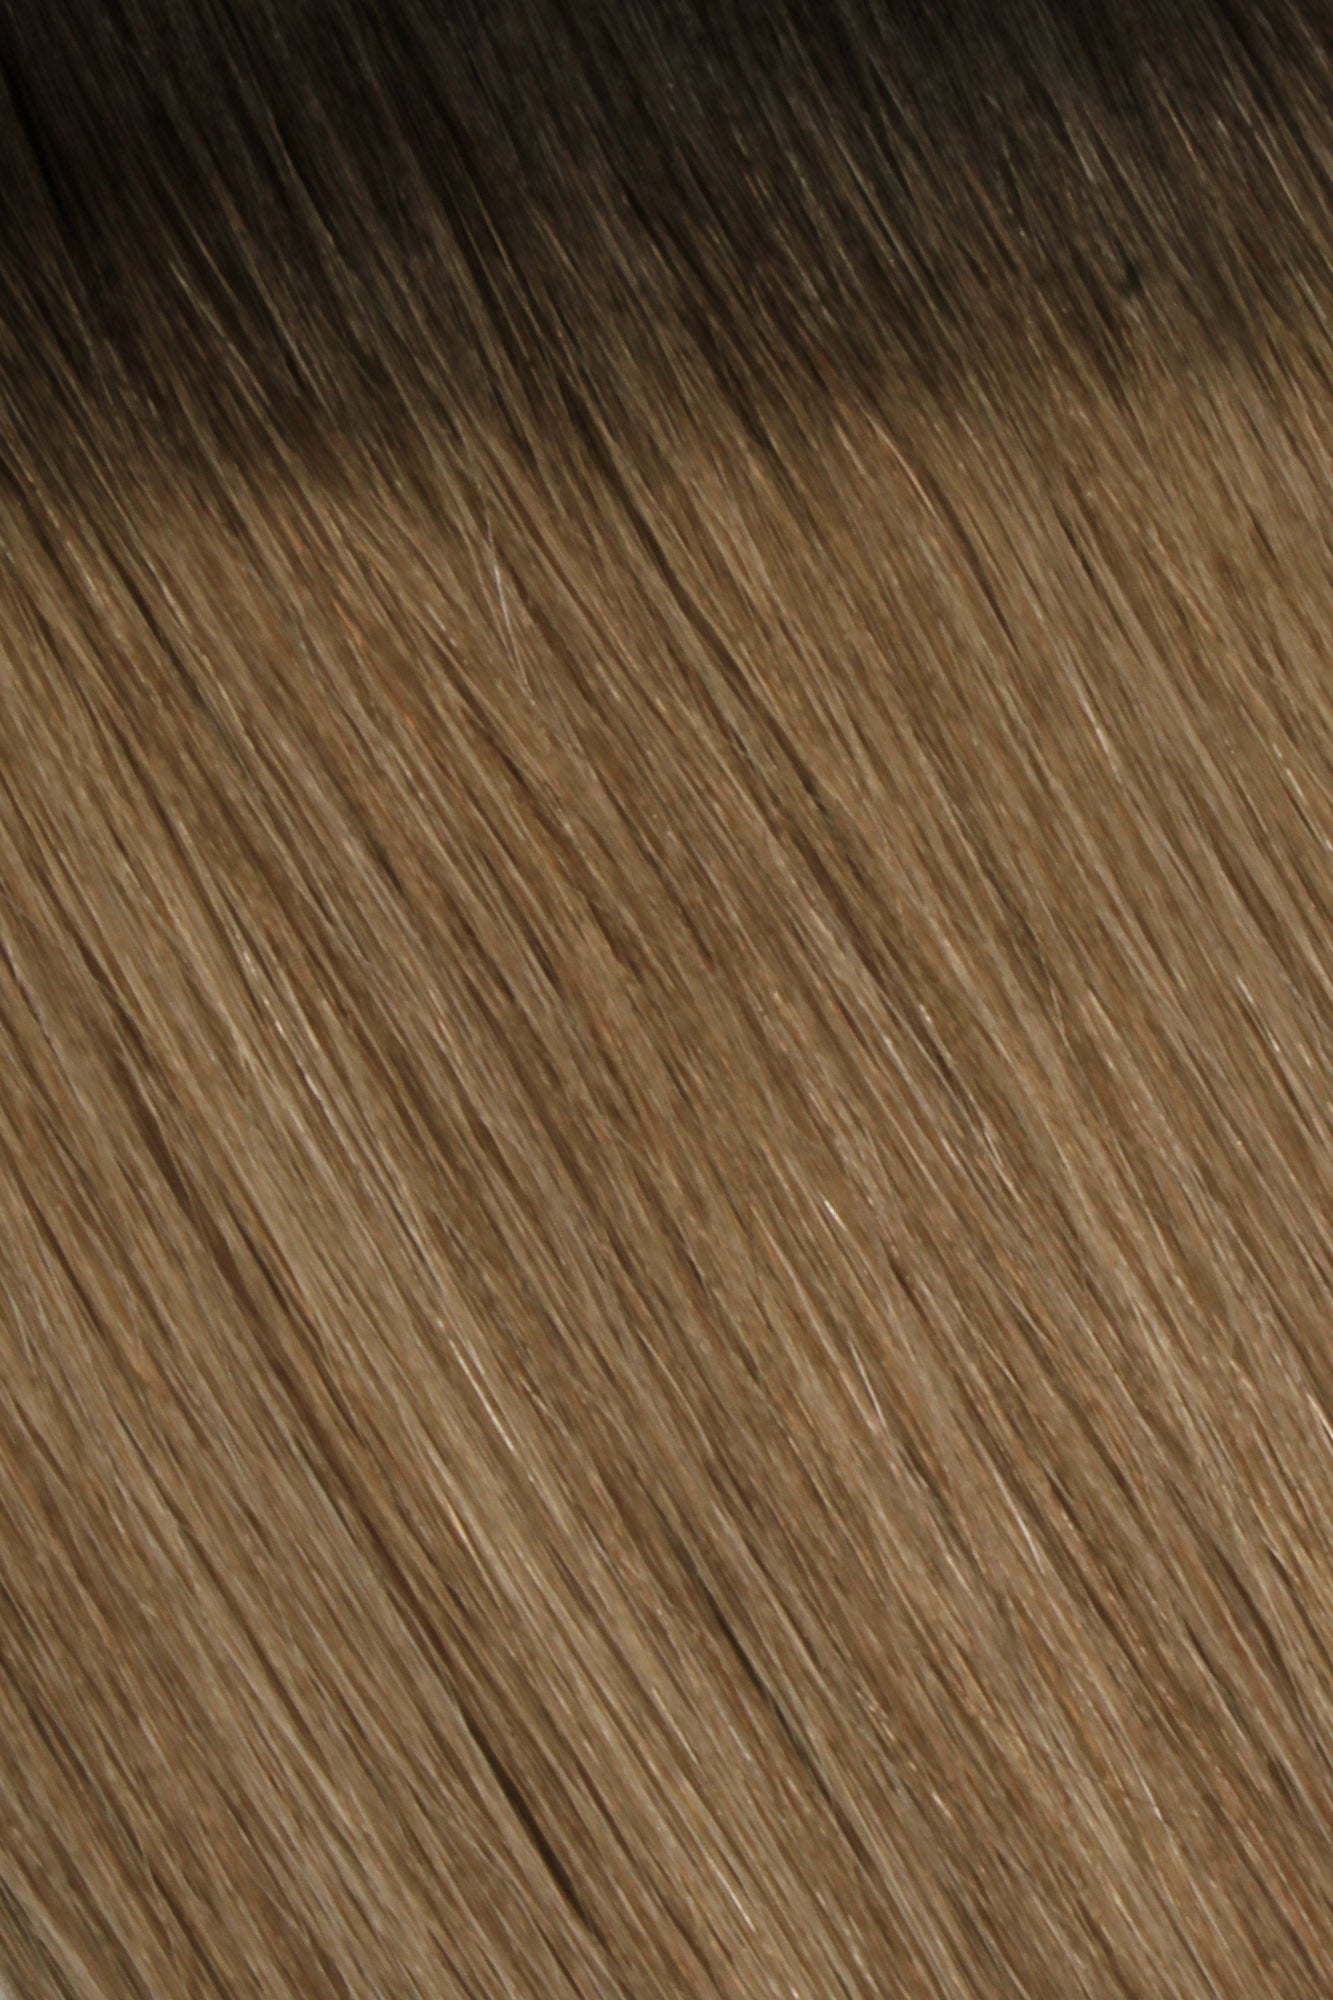 SEAMLESS® Flat Weft 16 Inches - SWAY Hair Extensions Mochaccino-Melt-R2-6-24 Natural SEAMLESS® Flat Weft 16 Inches extensions. Thin, flexible, and discreet. 100% Double Drawn Remy Human Hair. Versatile and reusable